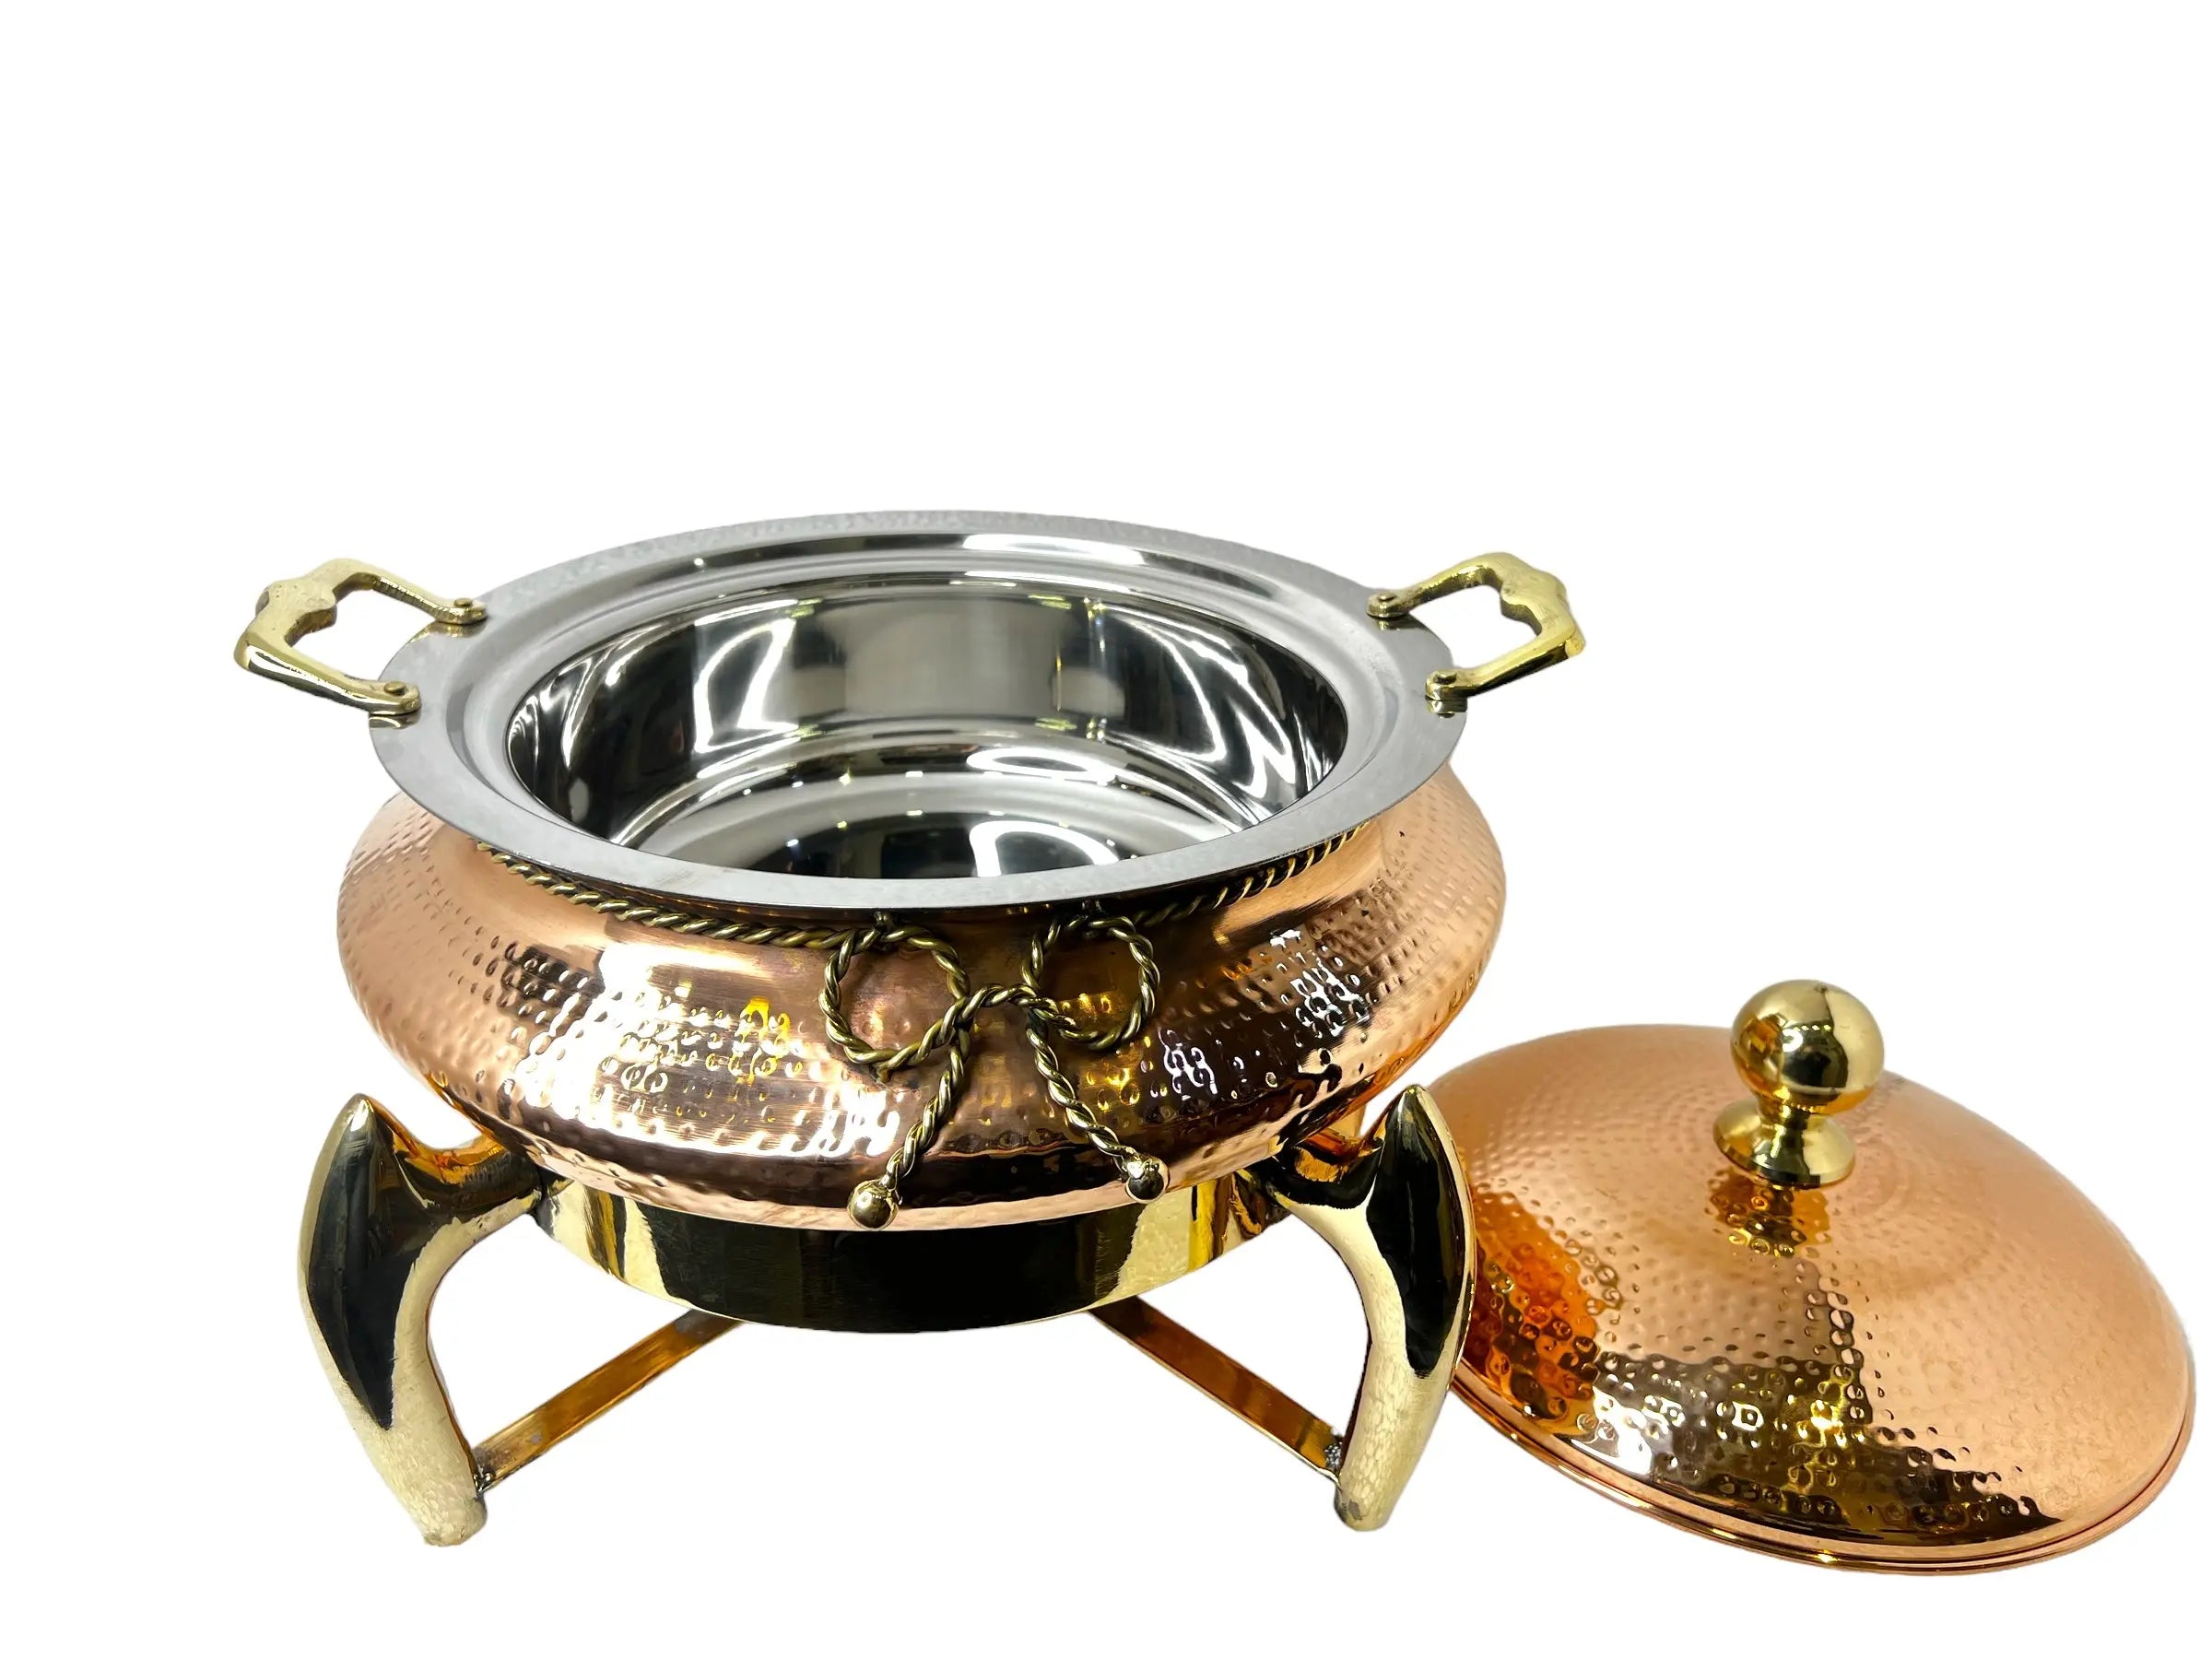 Crockery Wala And Company Pure Copper Chafing Dish New Jersey Style for Parties and functions - CROCKERY WALA AND COMPANY 